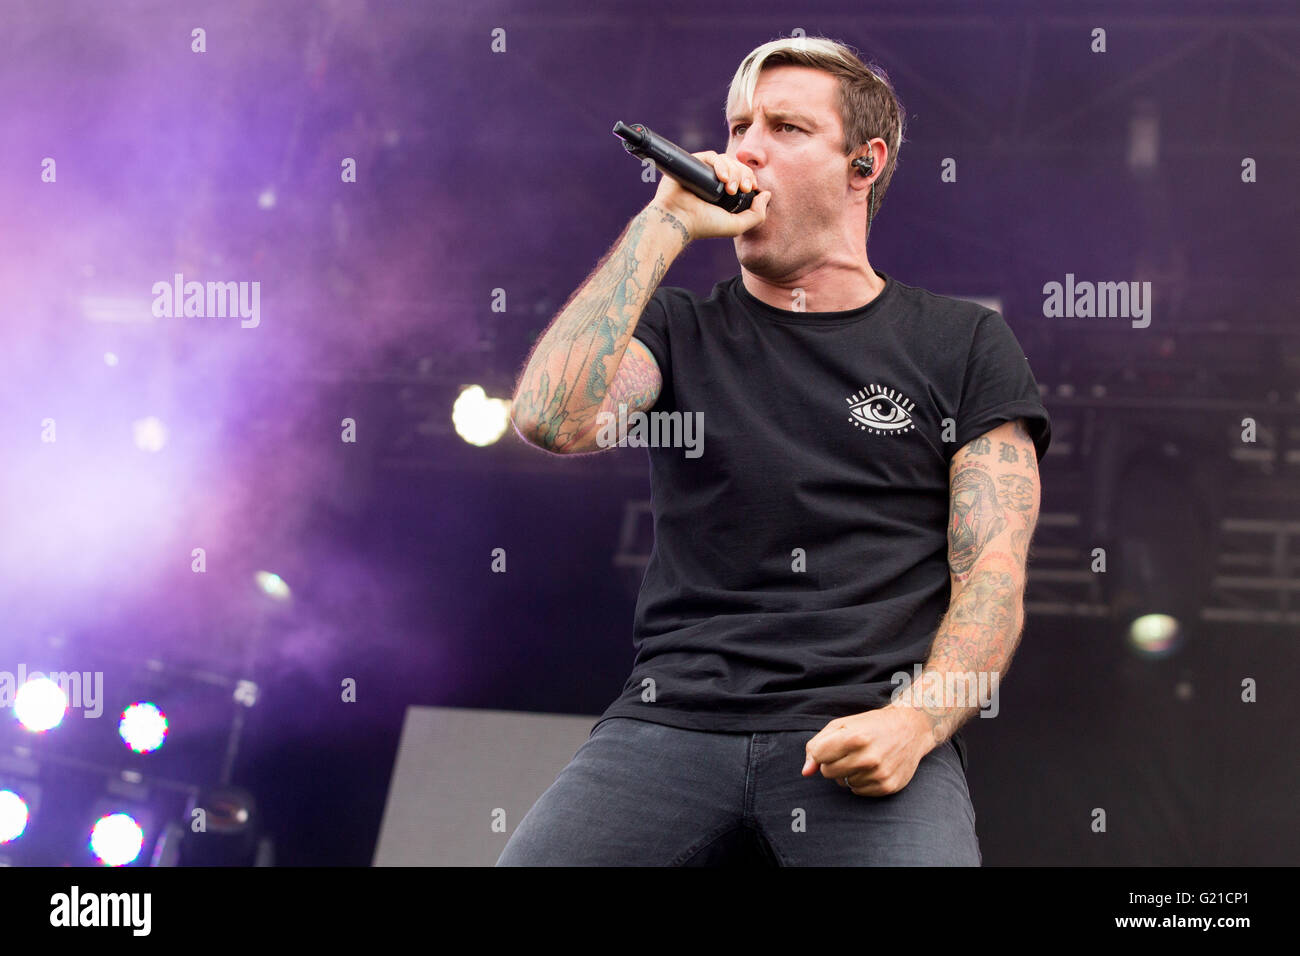 Columbus, Ohio, USA. 21st May, 2016. Singer WINSTON MCCALL of Parkway Drive performs live during Rock on the Range music festival at Columbus Crew Stadium in Columbus, Ohio © Daniel DeSlover/ZUMA Wire/Alamy Live News Stock Photo